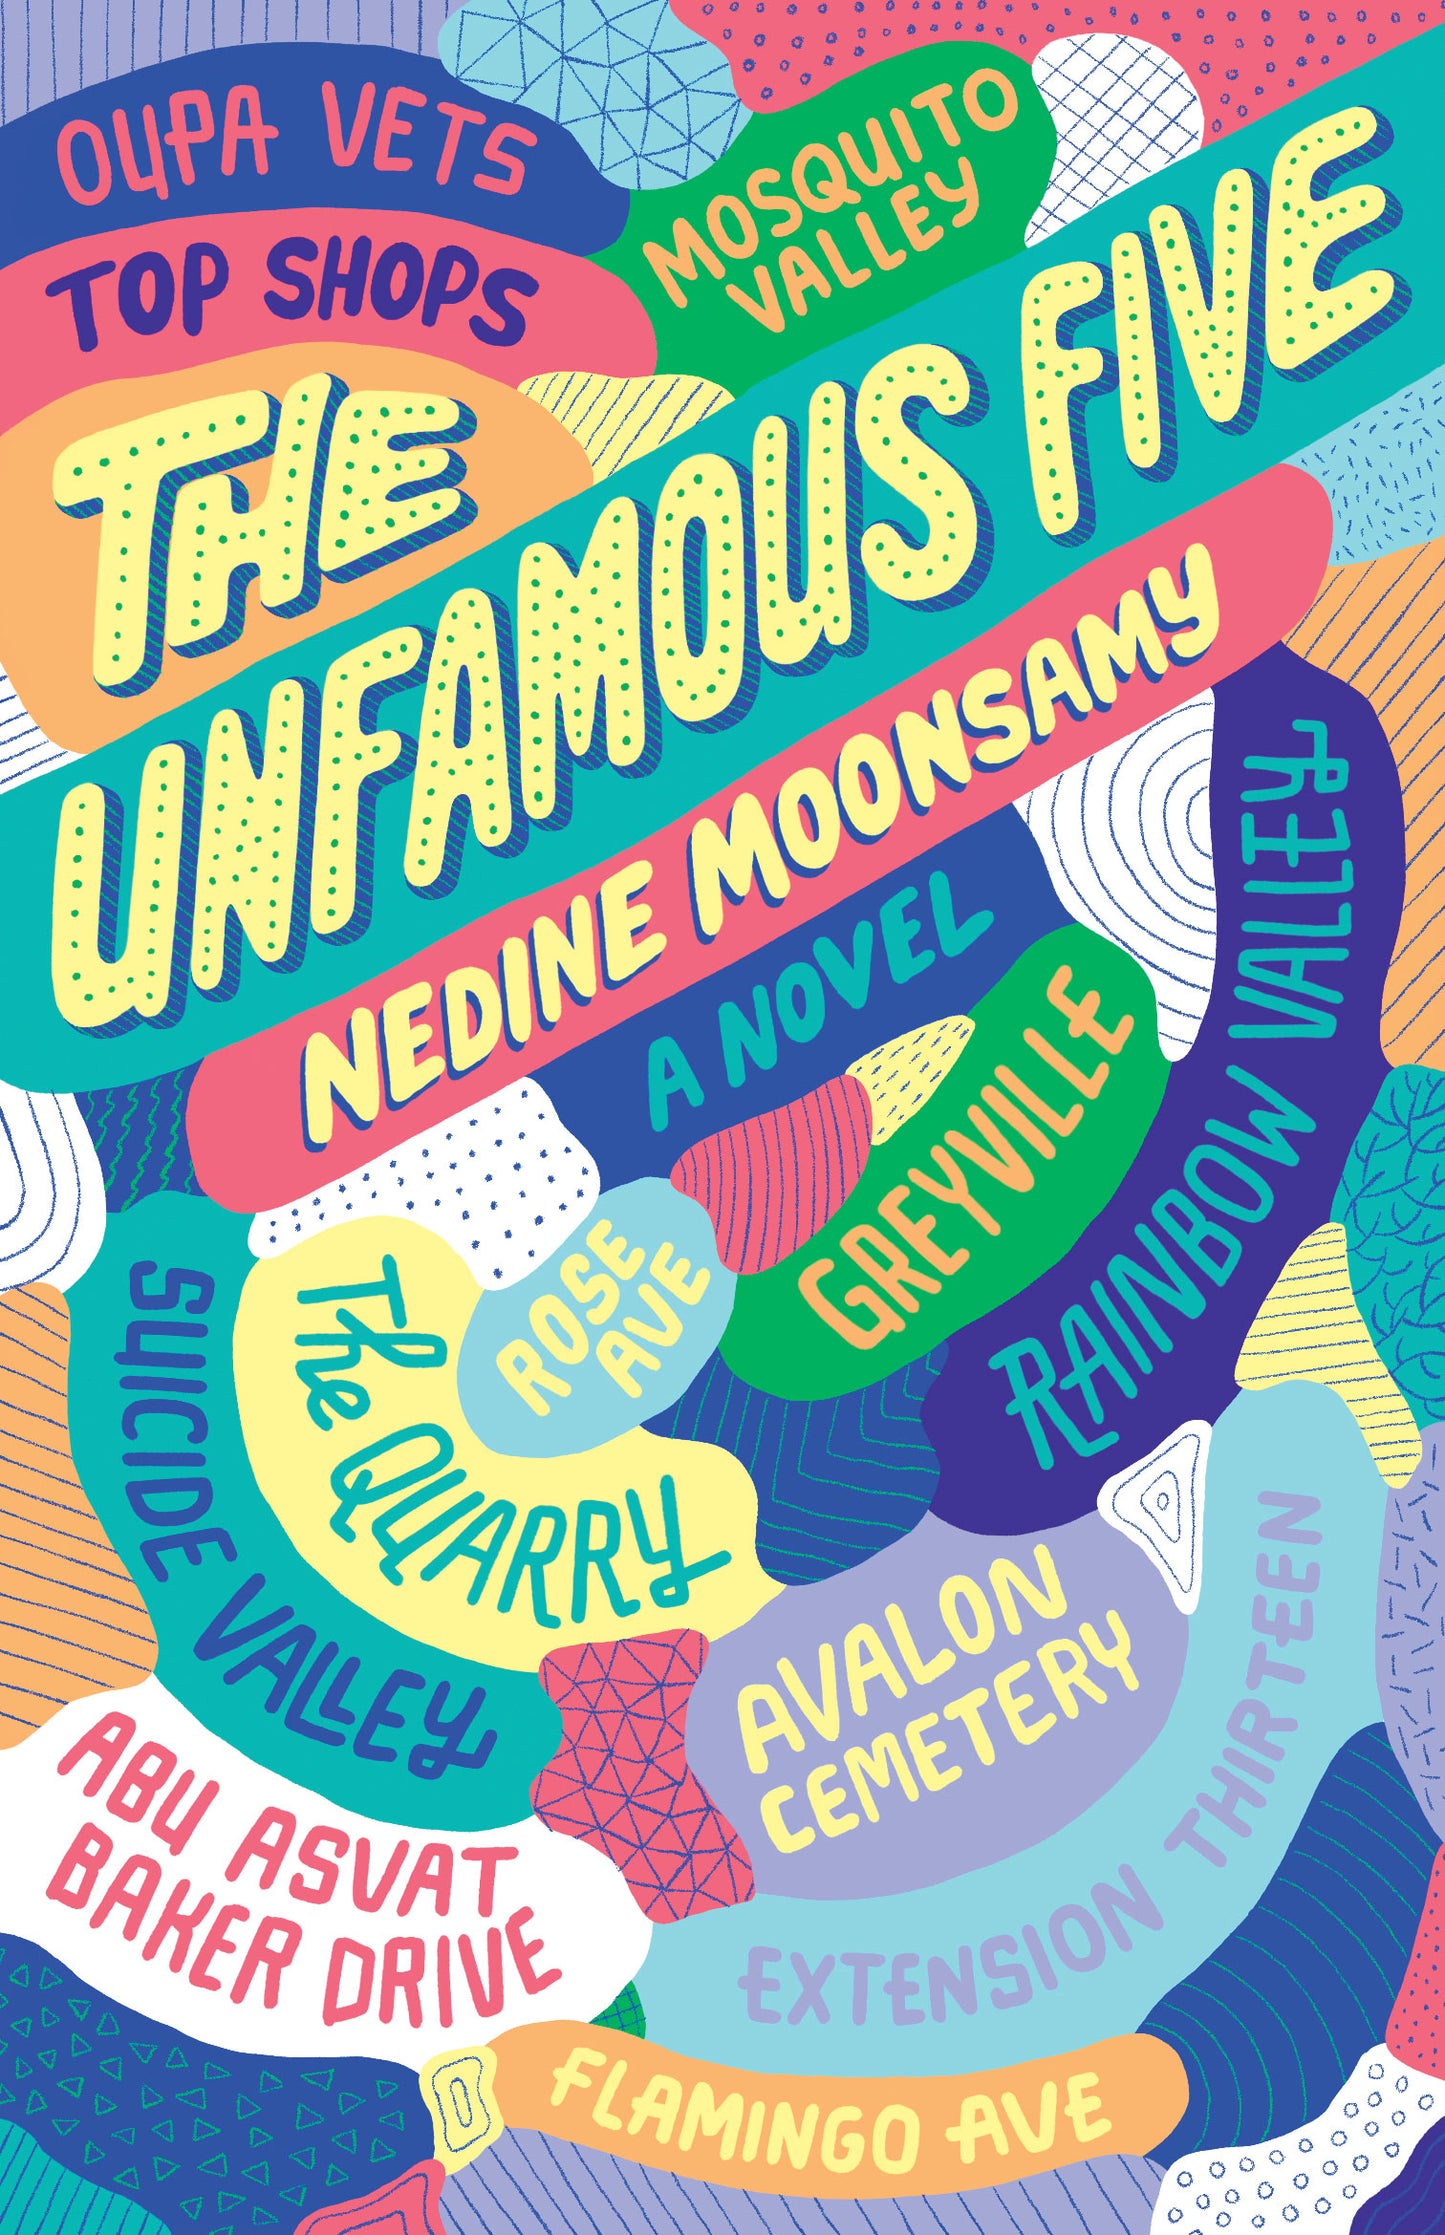 The Unfamous Five by Nedine Moonsamy